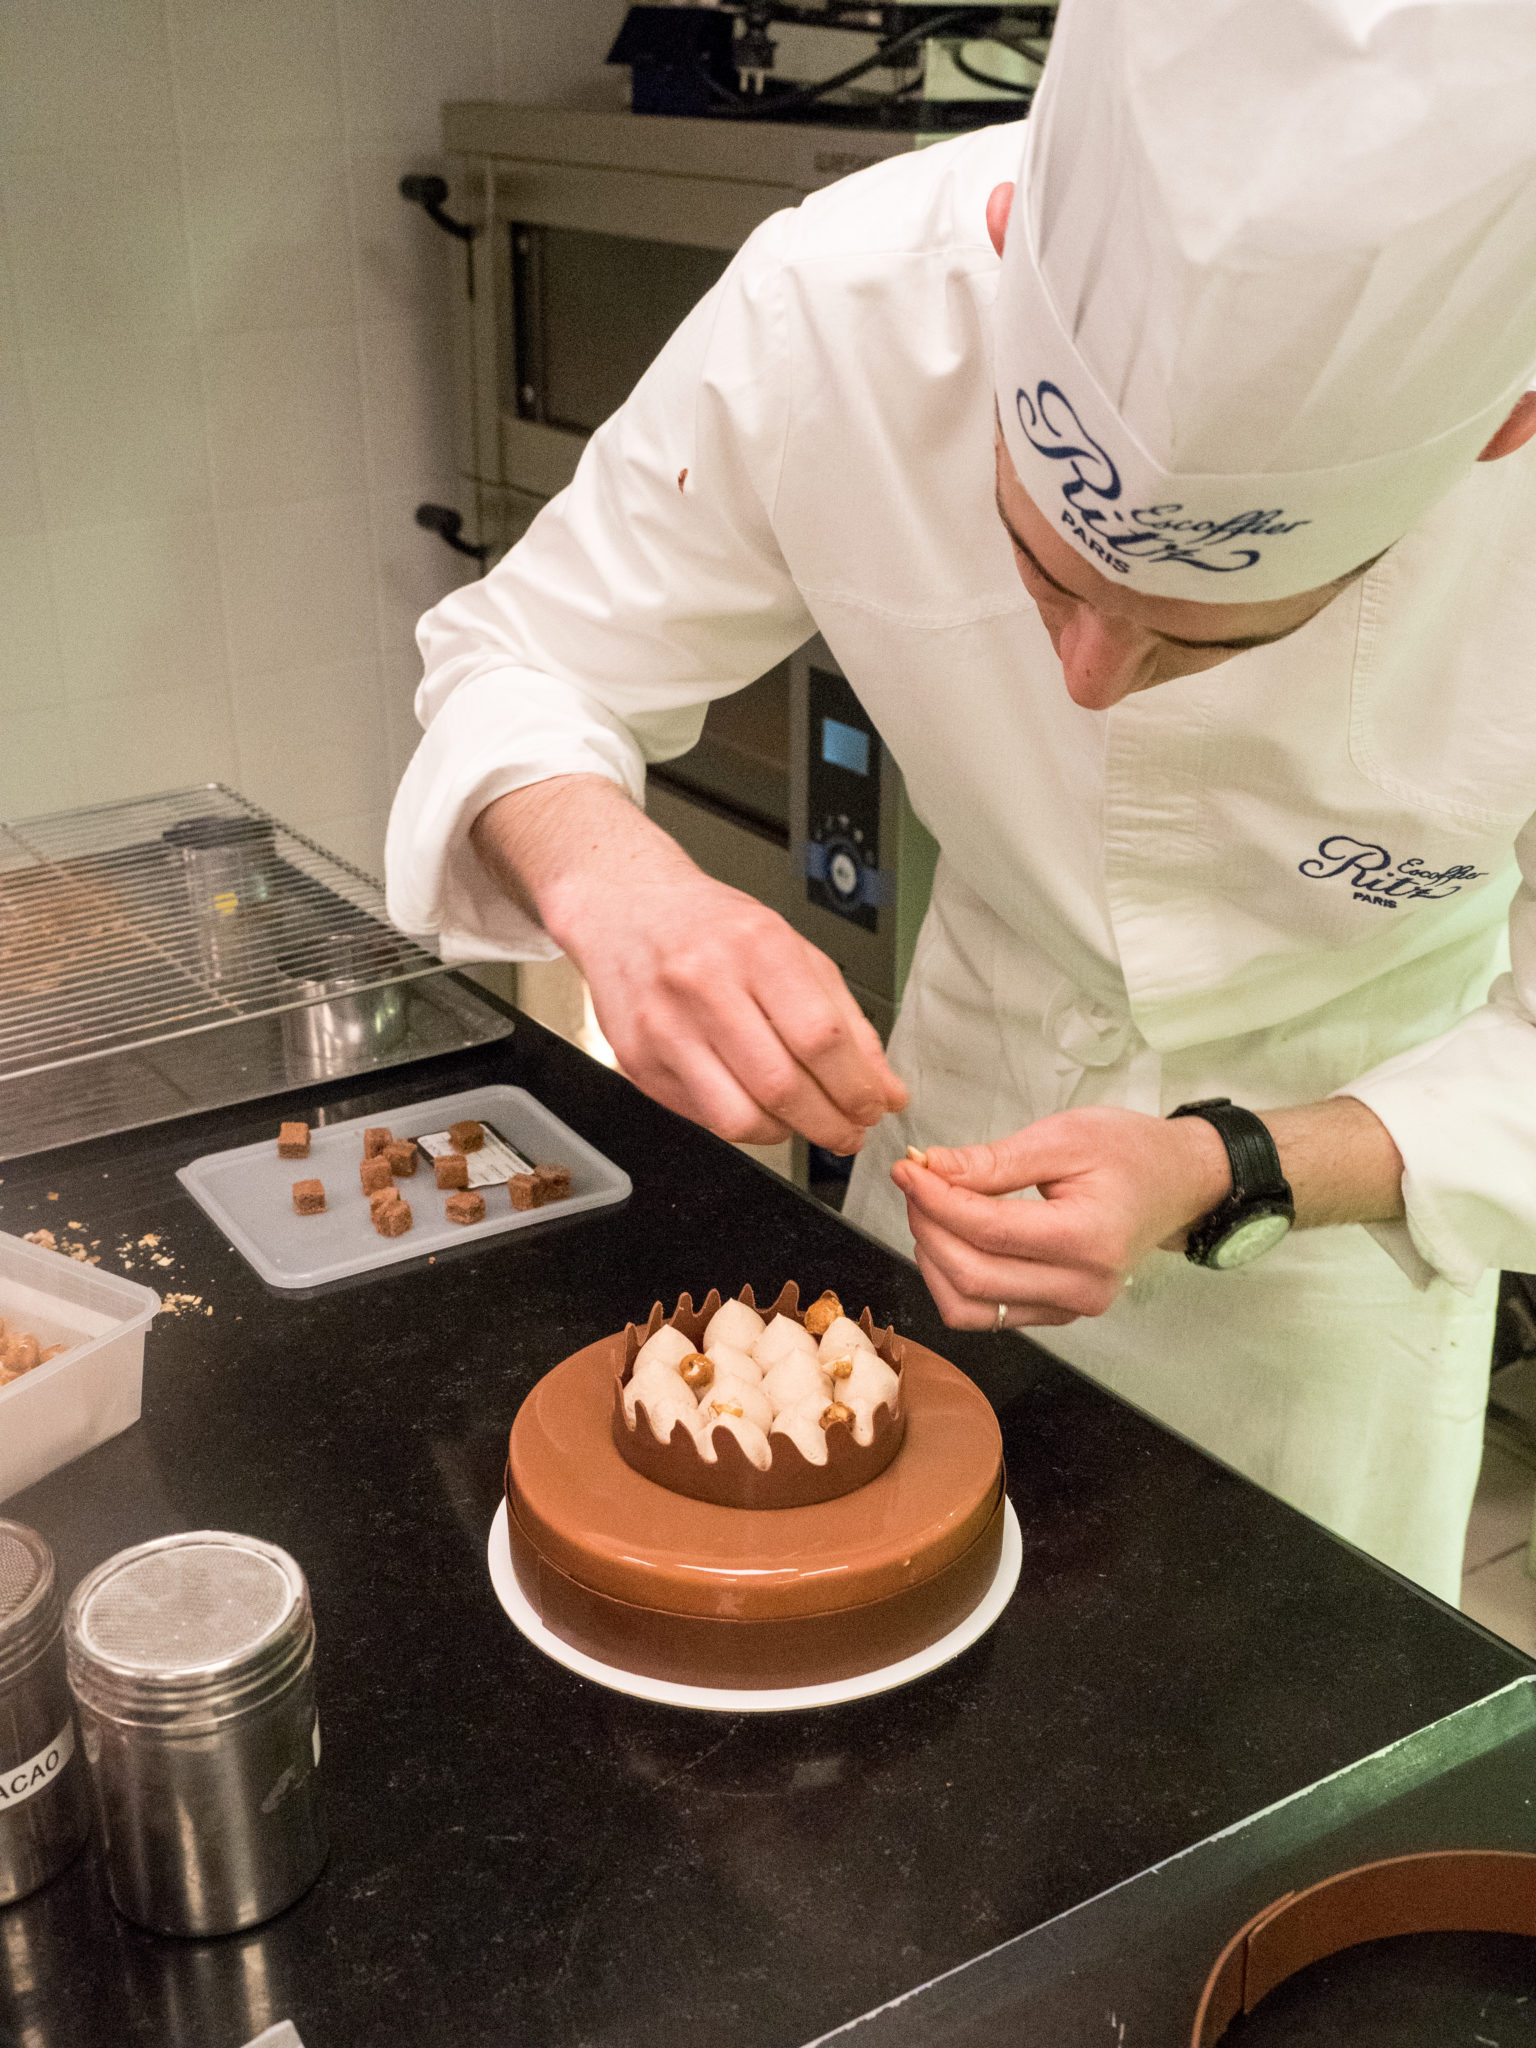 Paris Pastry Class at the Ritz | WORLD OF WANDERLUST